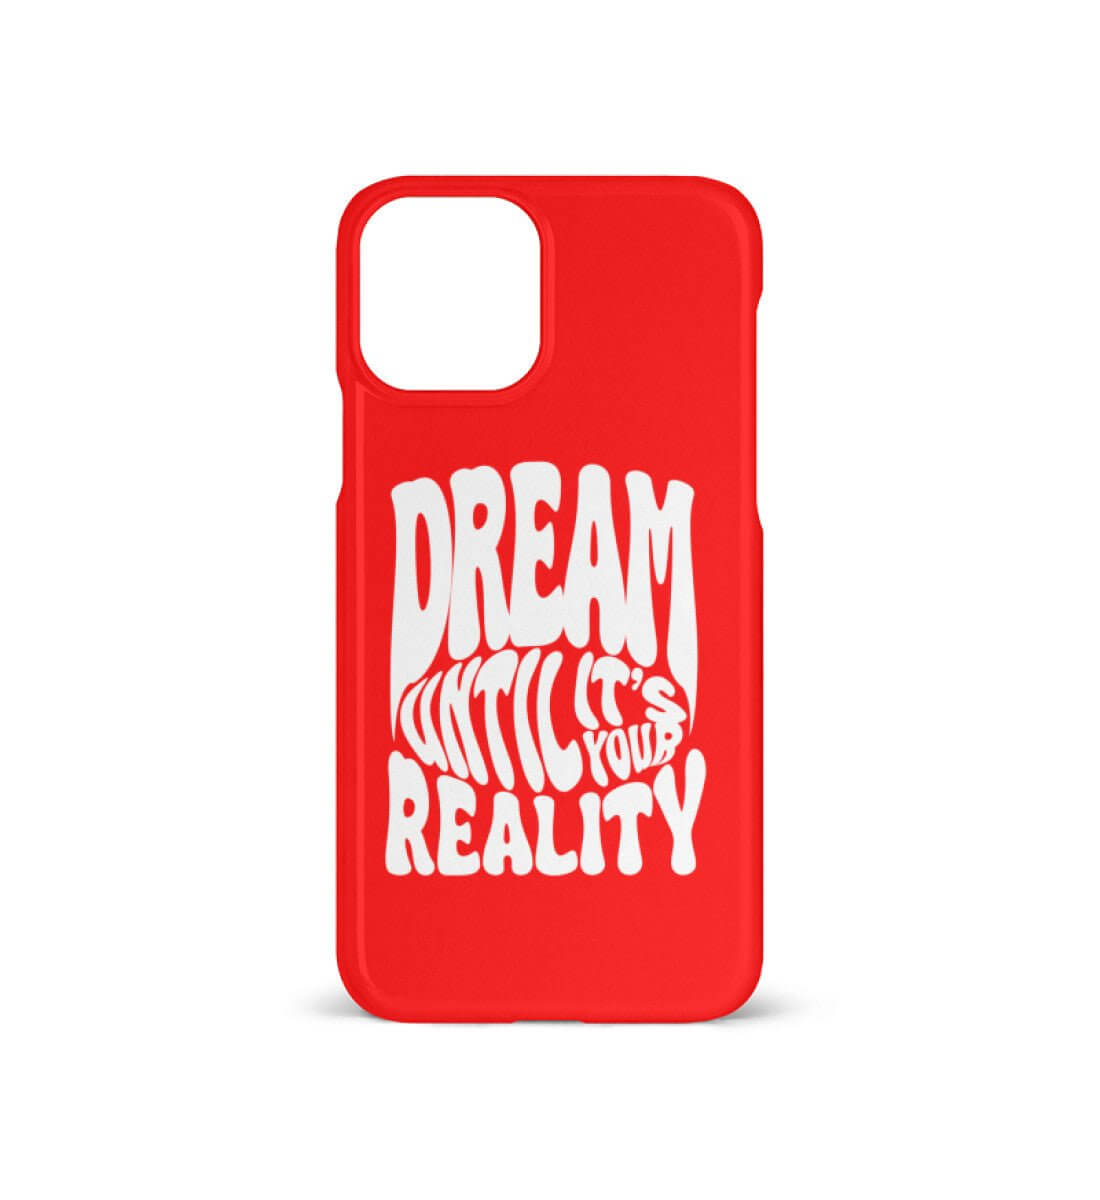 'DREAM UNTIL IT'S YOUR REALITY' - iPhone 11 Pro Handyhülle - GODVIBES